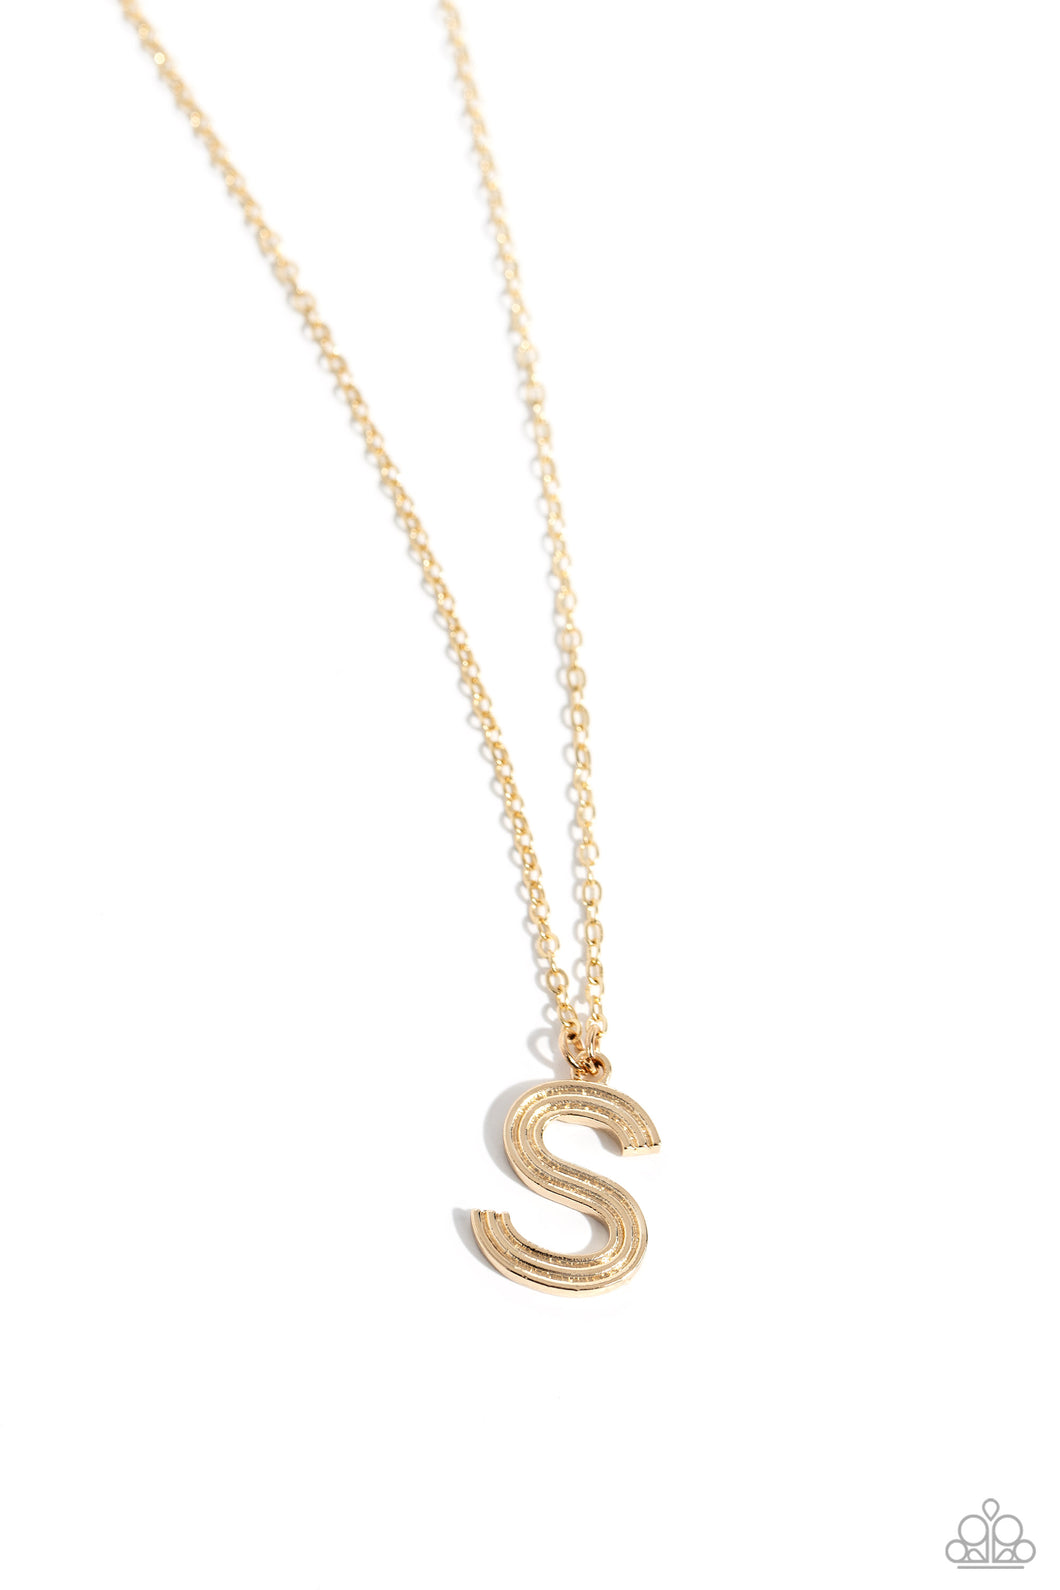 Leave Your Initials - Gold - S Necklace - Paparazzi - Dare2bdazzlin N Jewelry